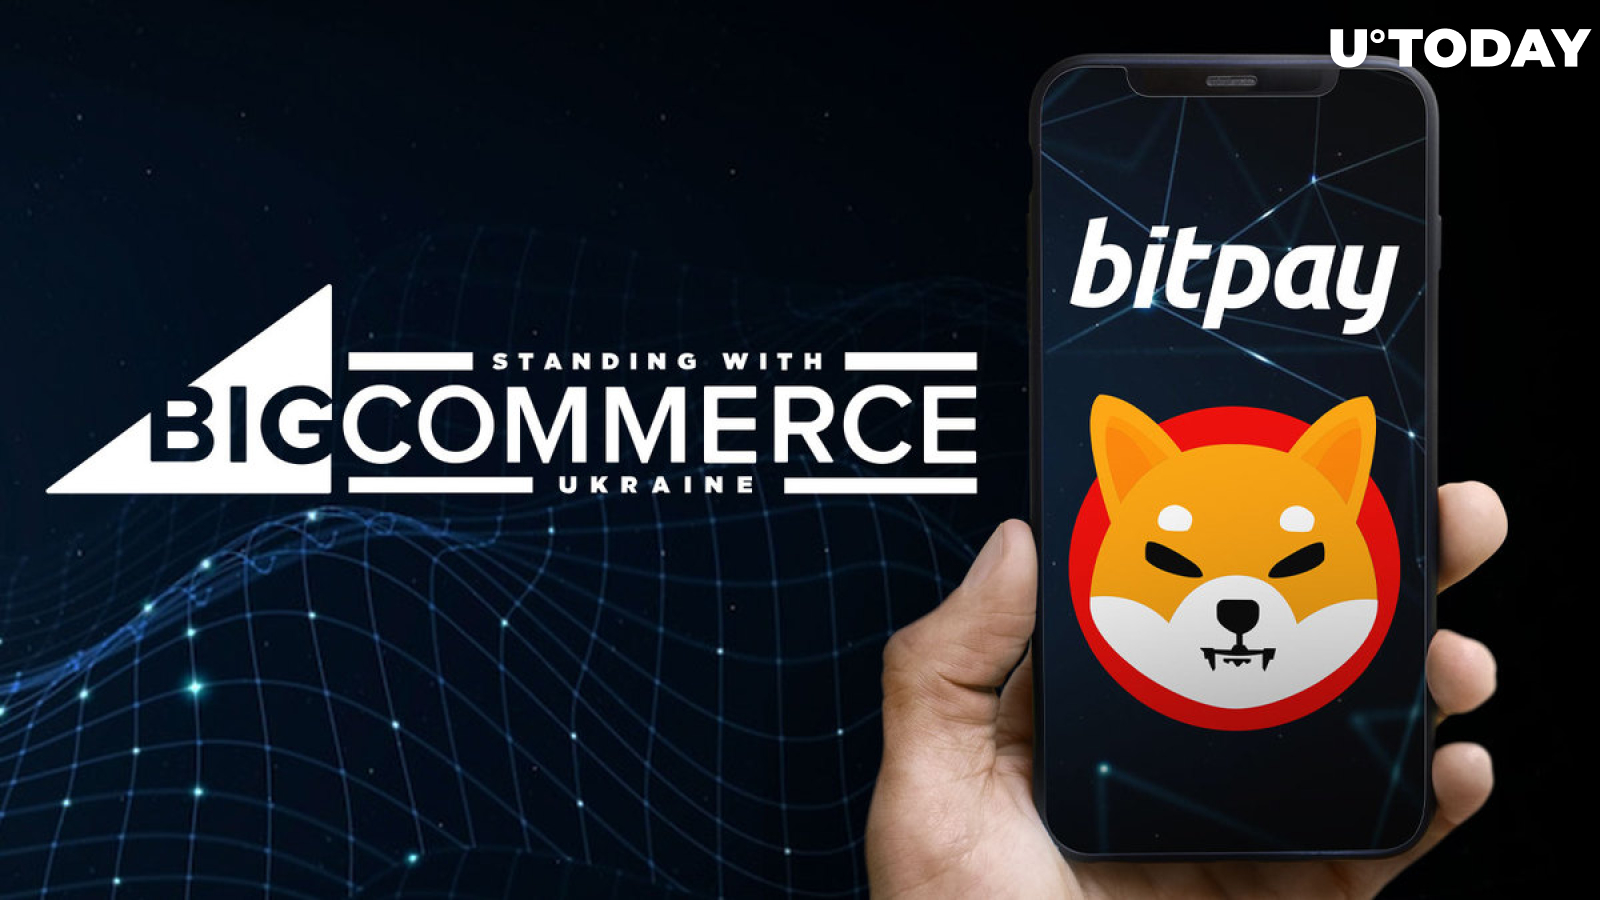 SHIB and Other Crypto Payments Preferred by Majority of BigCommerce Customers: Details